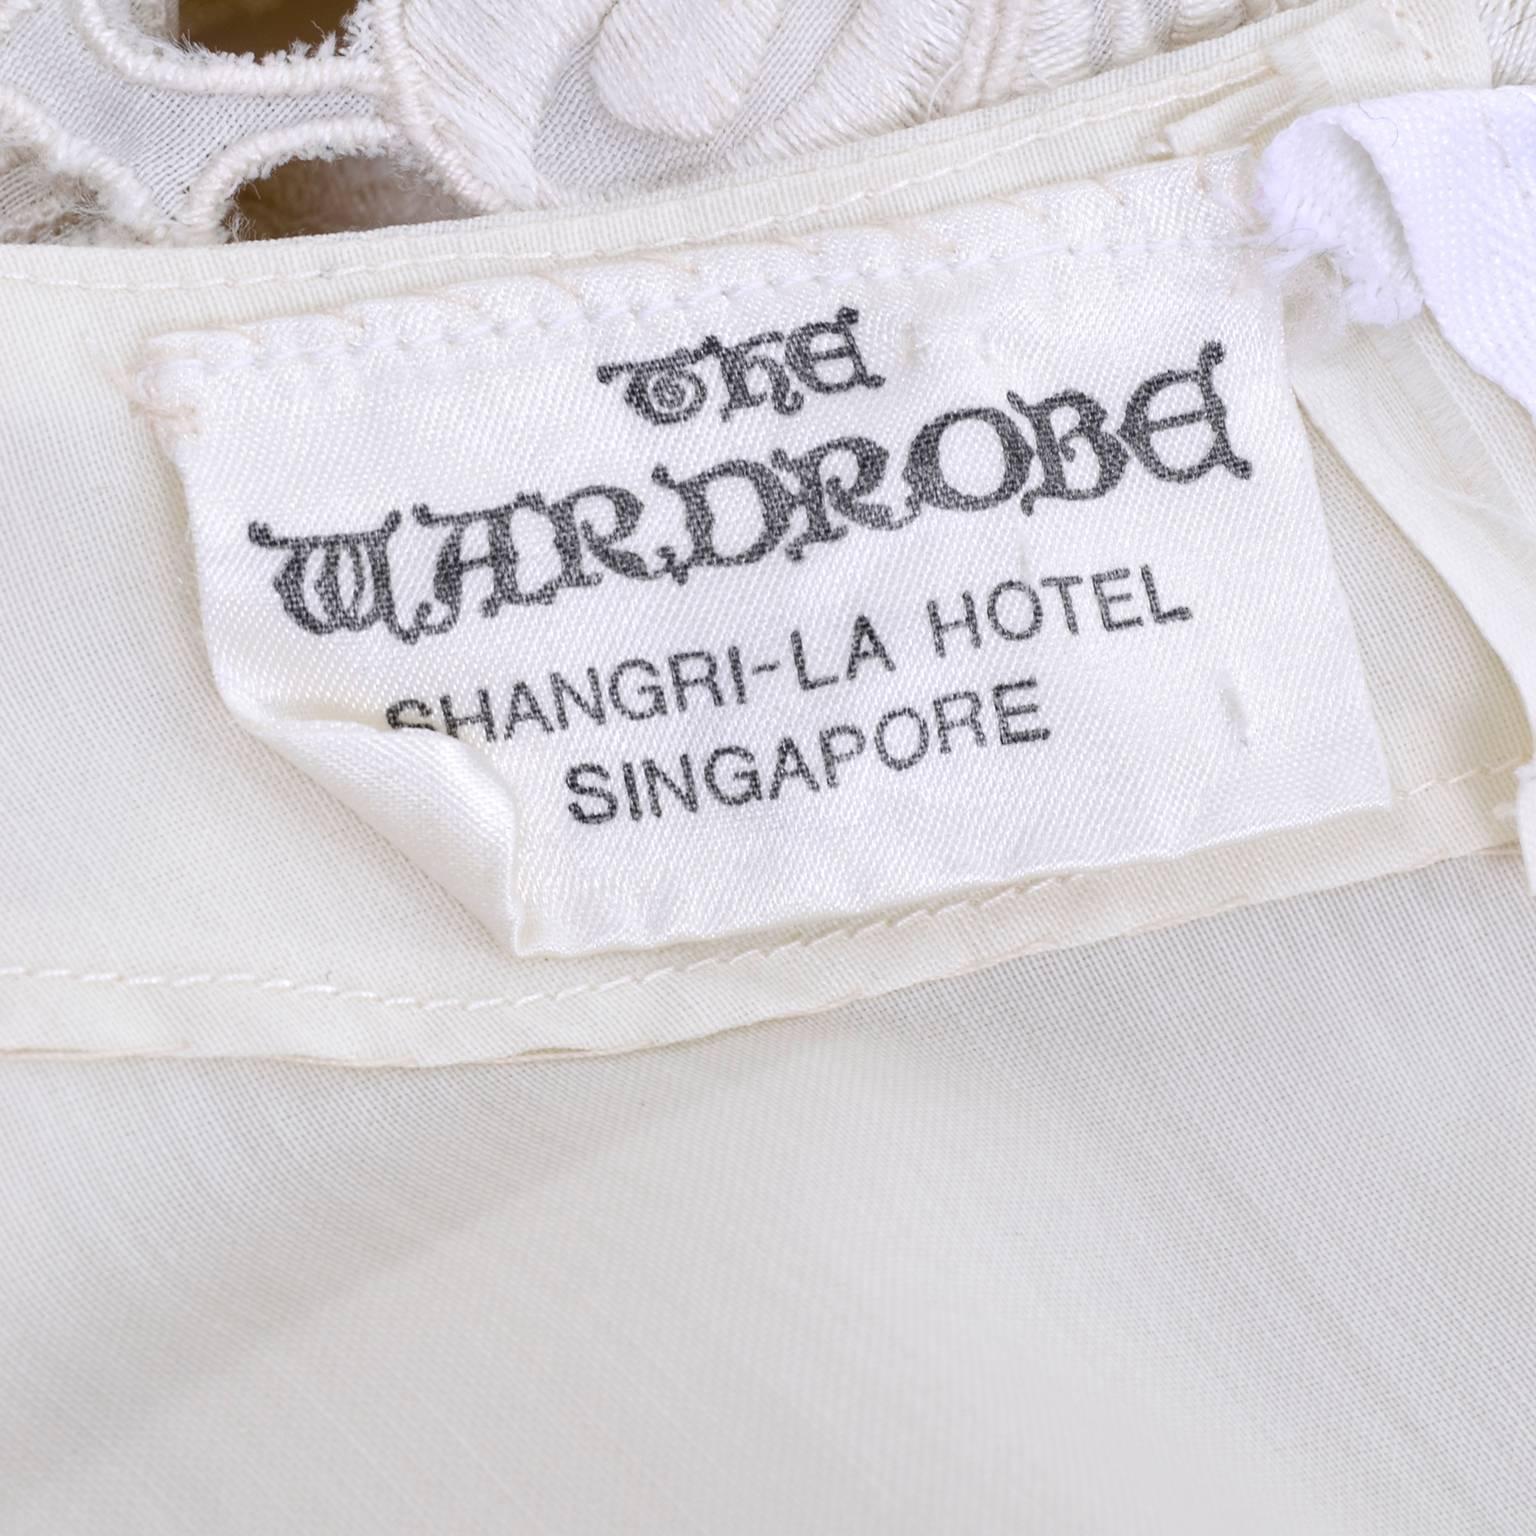 Shangri La Hotel Singapore Vintage Dress or Wedding Gown With Guipure Lace 4